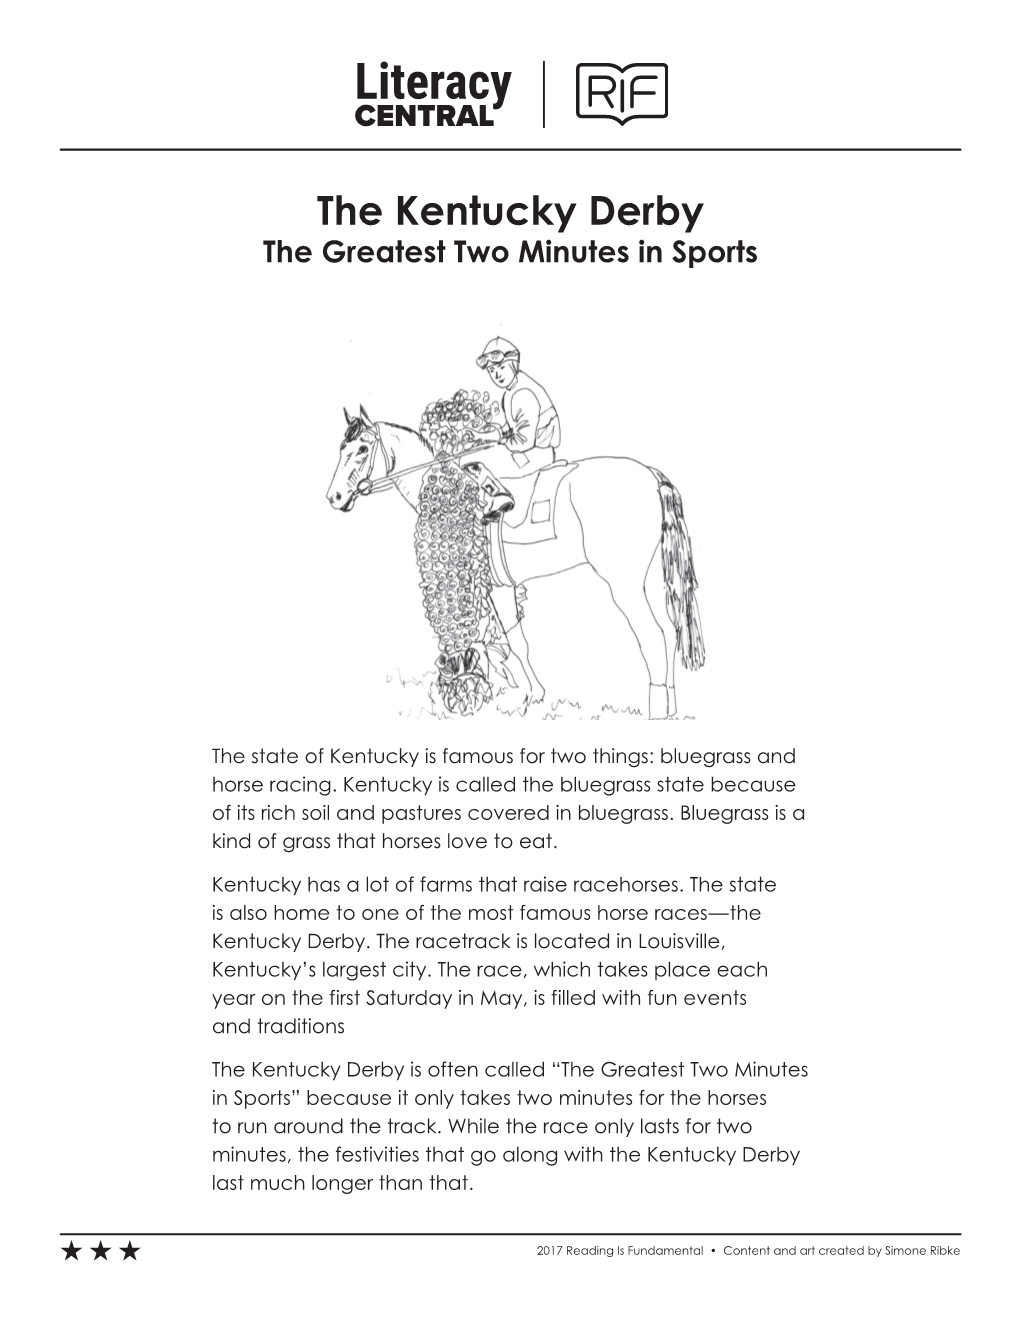 The Kentucky Derby the Greatest Two Minutes in Sports